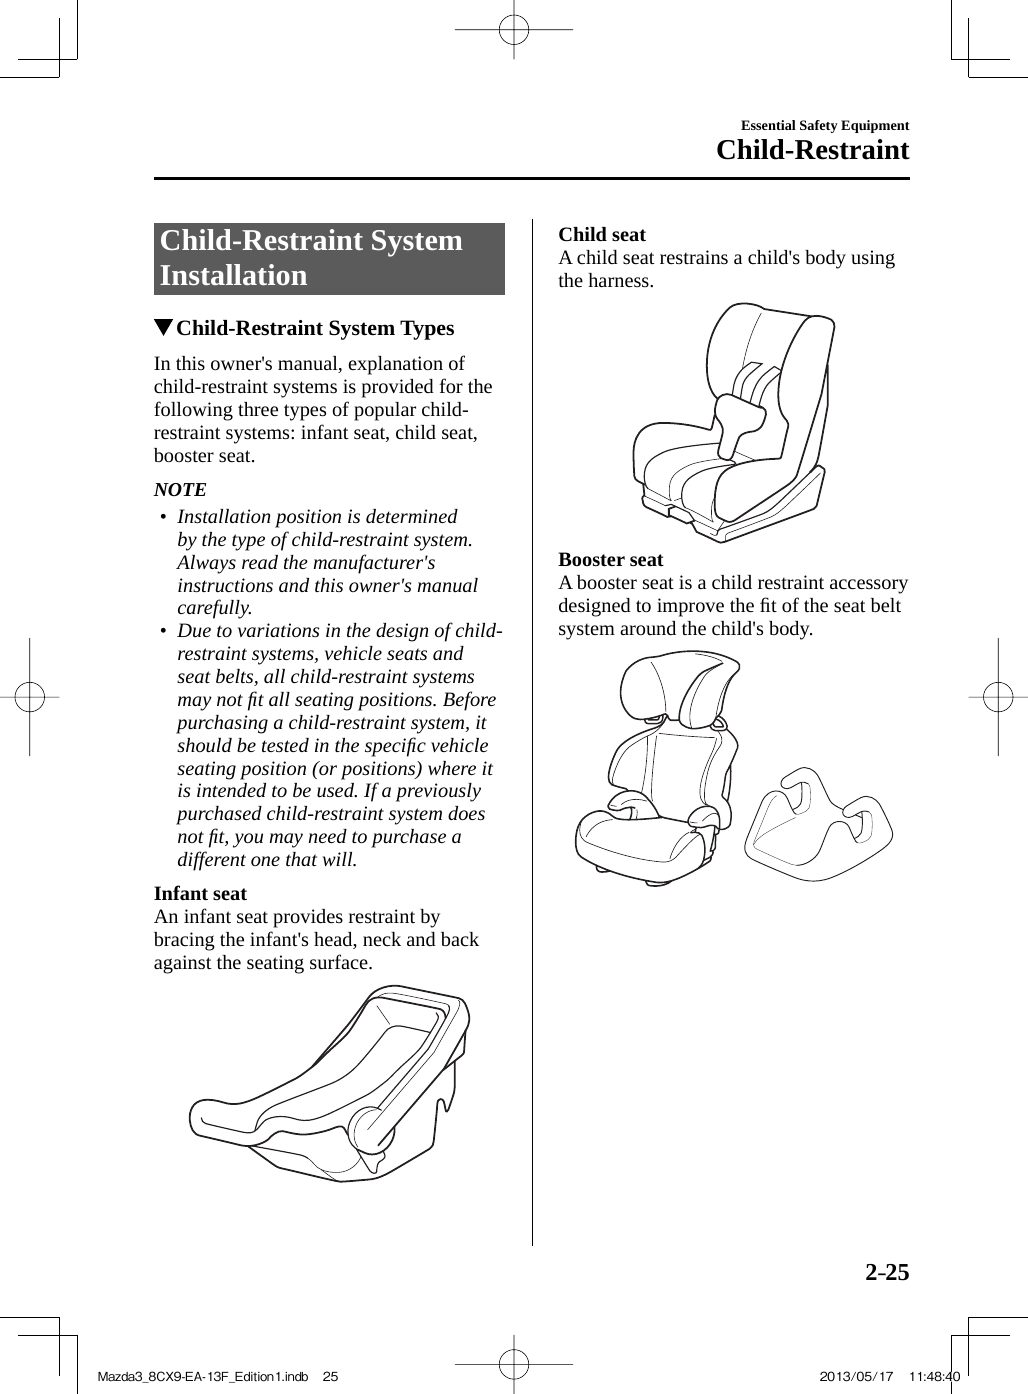 2–25Essential Safety EquipmentChild-Restraint Child-Restraint  System Installation               Child-Restraint System Types    In this owner&apos;s manual, explanation of child-restraint systems is provided for the following three types of popular child-restraint systems: infant seat, child seat, booster seat.   NOTE•         Installation position is determined by the type of child-restraint system. Always read the manufacturer&apos;s instructions and this owner&apos;s manual carefully.•         Due to variations in the design of child-restraint systems, vehicle seats and seat belts, all child-restraint systems may not ﬁ t all seating positions. Before purchasing a child-restraint system, it should be tested in the speciﬁ c vehicle seating position (or positions) where it is intended to be used. If a previously purchased child-restraint system does not ﬁ t, you may need to purchase a different one that will.        Infant seat   An infant seat provides restraint by bracing the infant&apos;s head, neck and back against the seating surface.     Child seat   A child seat restrains a child&apos;s body using the harness.     Booster seat   A booster seat is a child restraint accessory designed to improve the ﬁ t of the seat belt system around the child&apos;s body.  Mazda3_8CX9-EA-13F_Edition1.indb   25Mazda3_8CX9-EA-13F_Edition1.indb   25 2013/05/17   11:48:402013/05/17   11:48:40